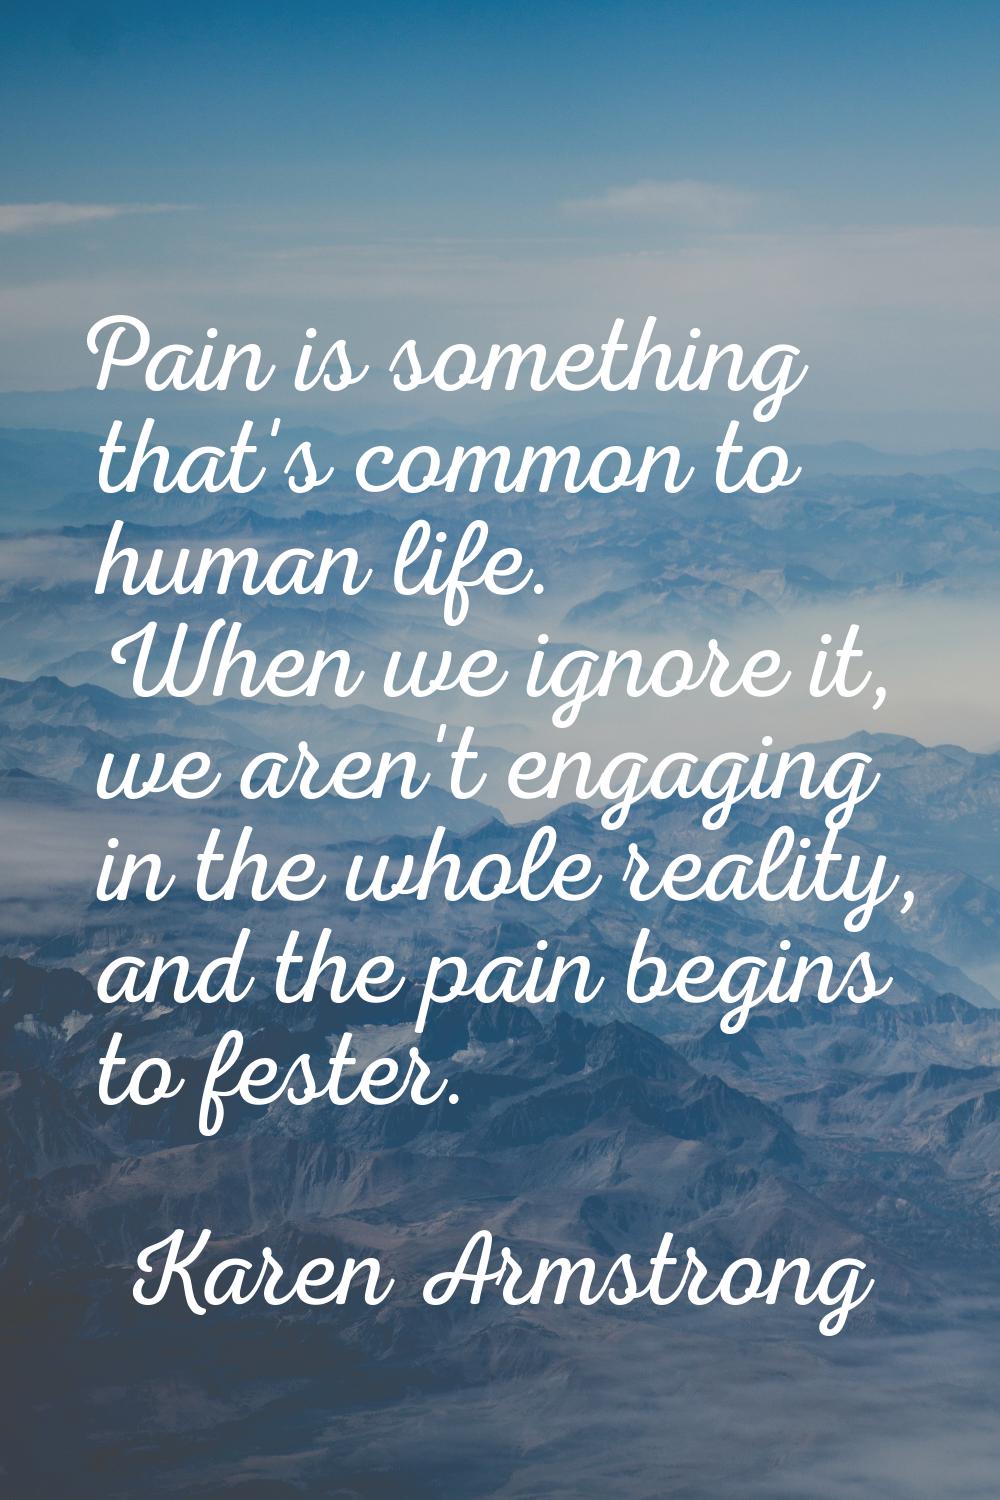 Pain is something that's common to human life. When we ignore it, we aren't engaging in the whole r